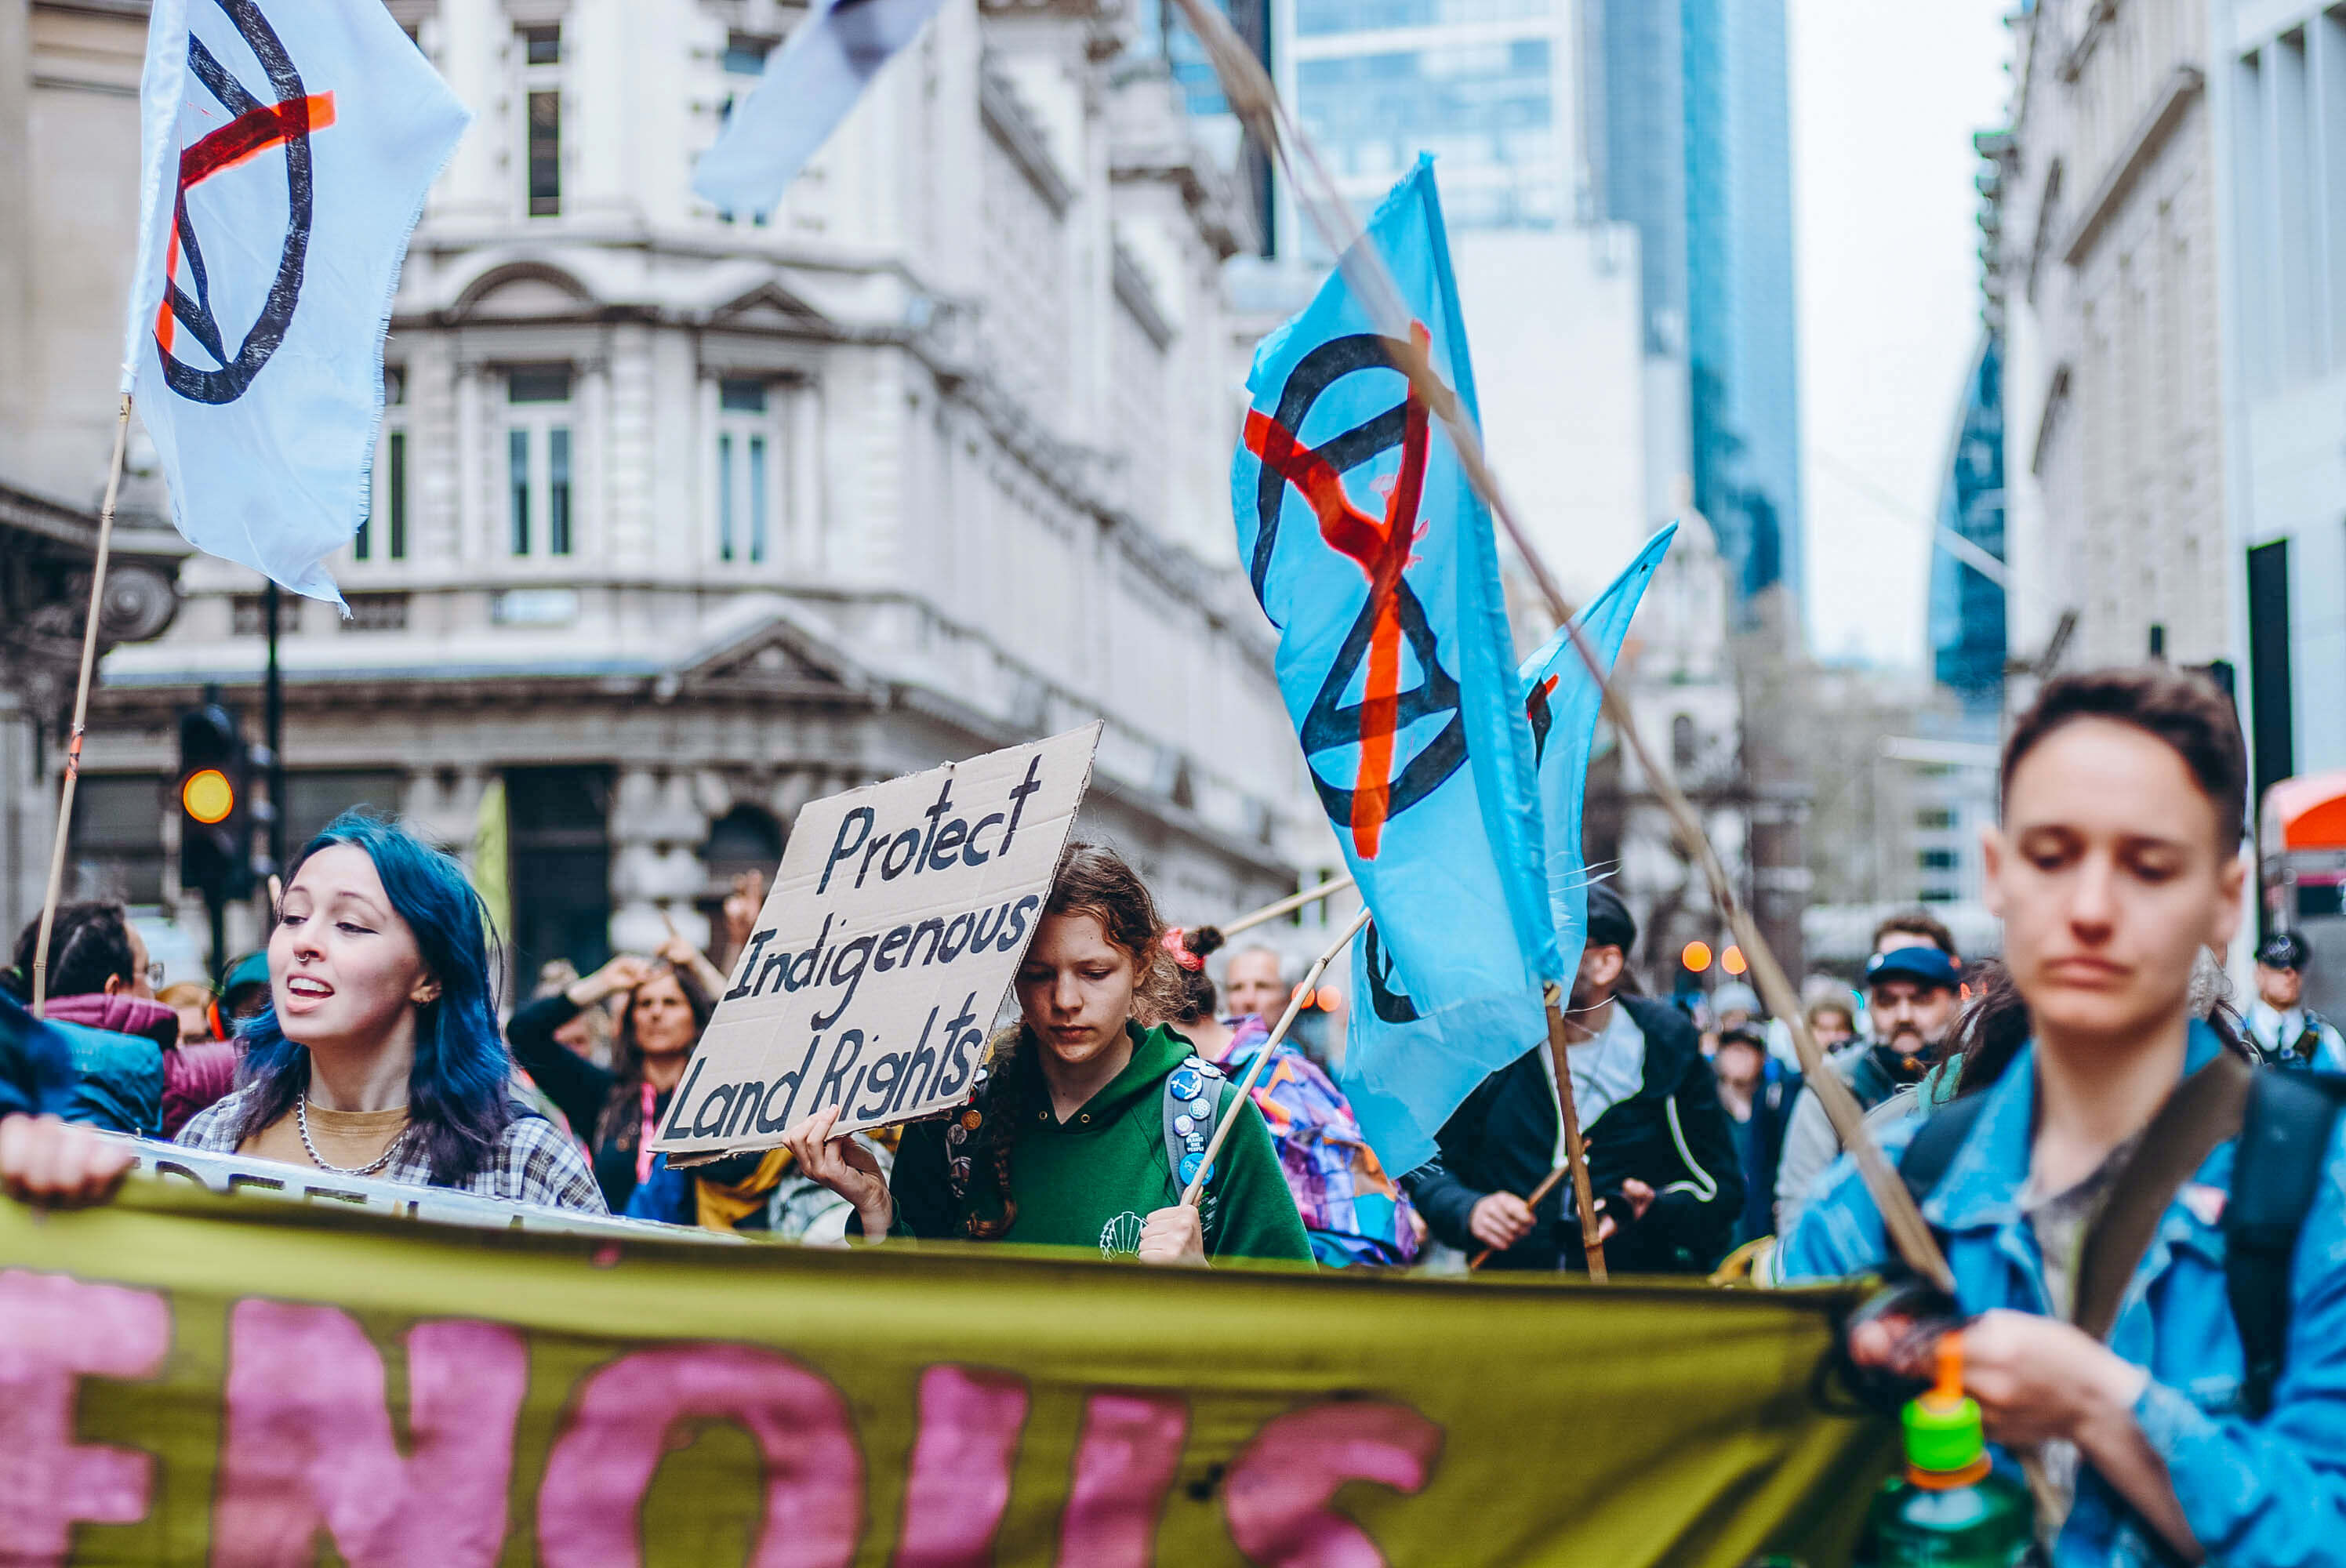 Image shows XR activists on the streets of Glasgow during COP26, holding a banner, a sign saying "Protect Indigenous Land Rights" and waving flags